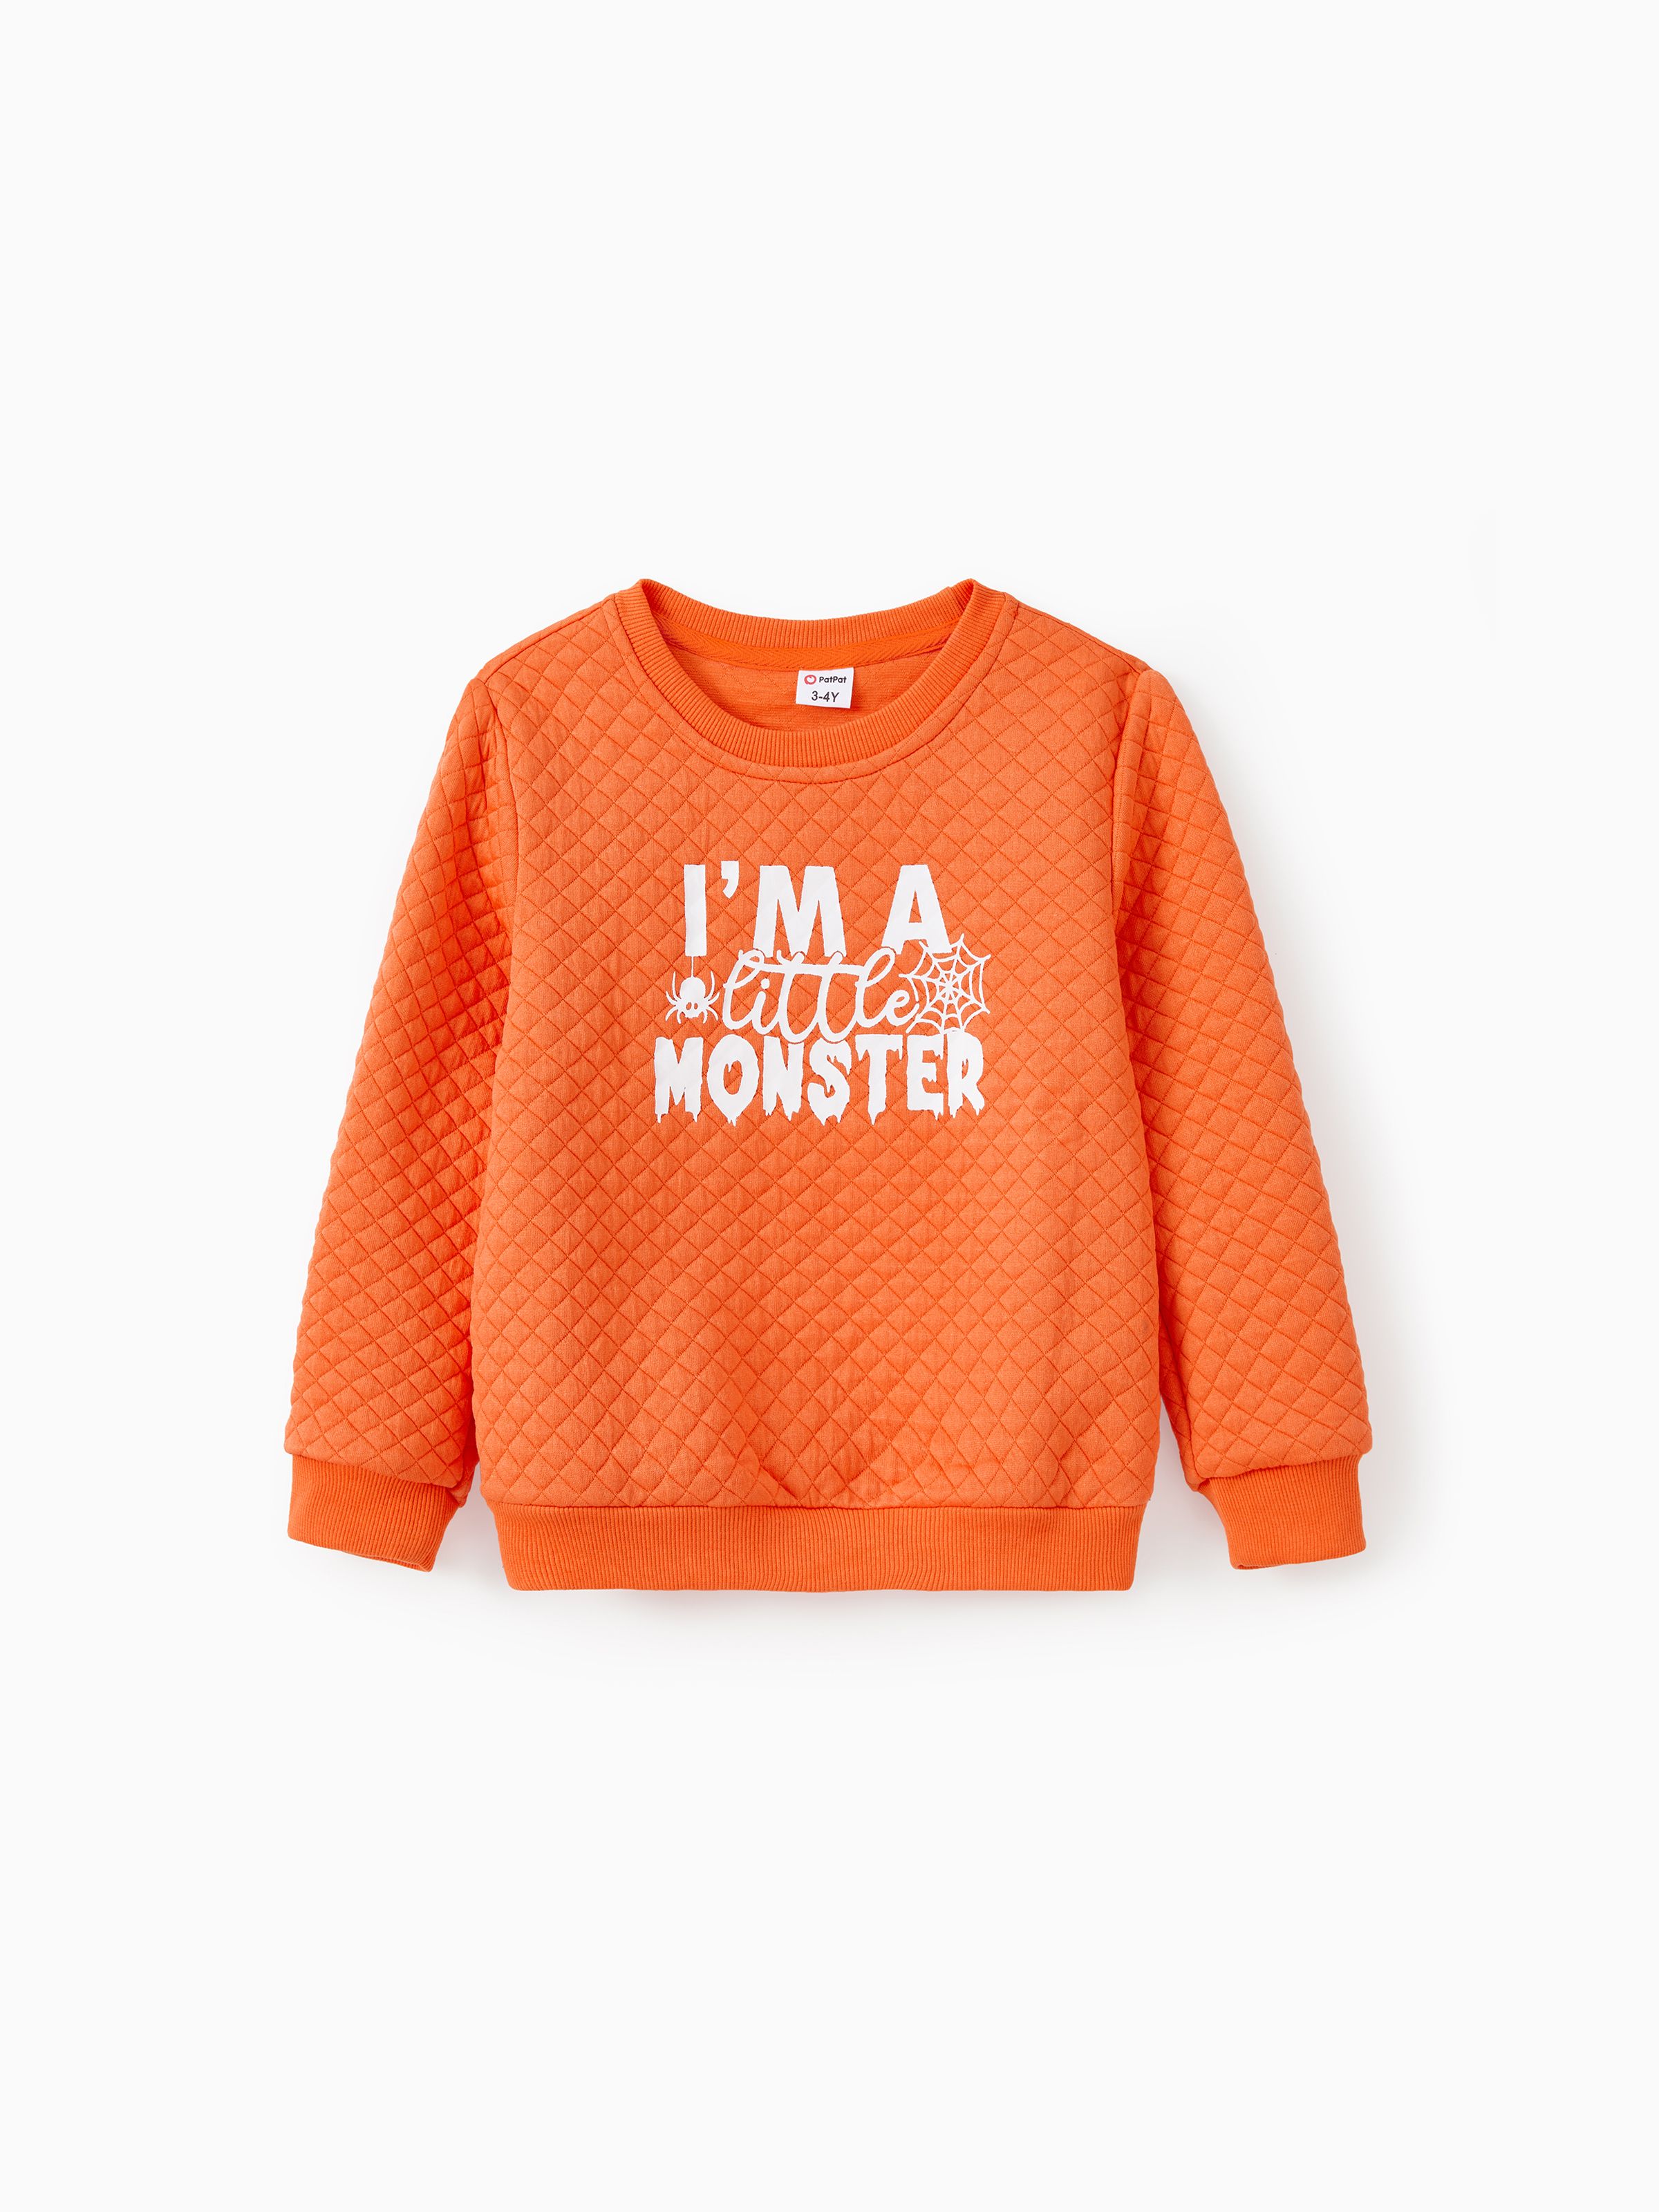 

Halloween Family Matching Orange Glow In The Dark Letter Spooky Spider Tops